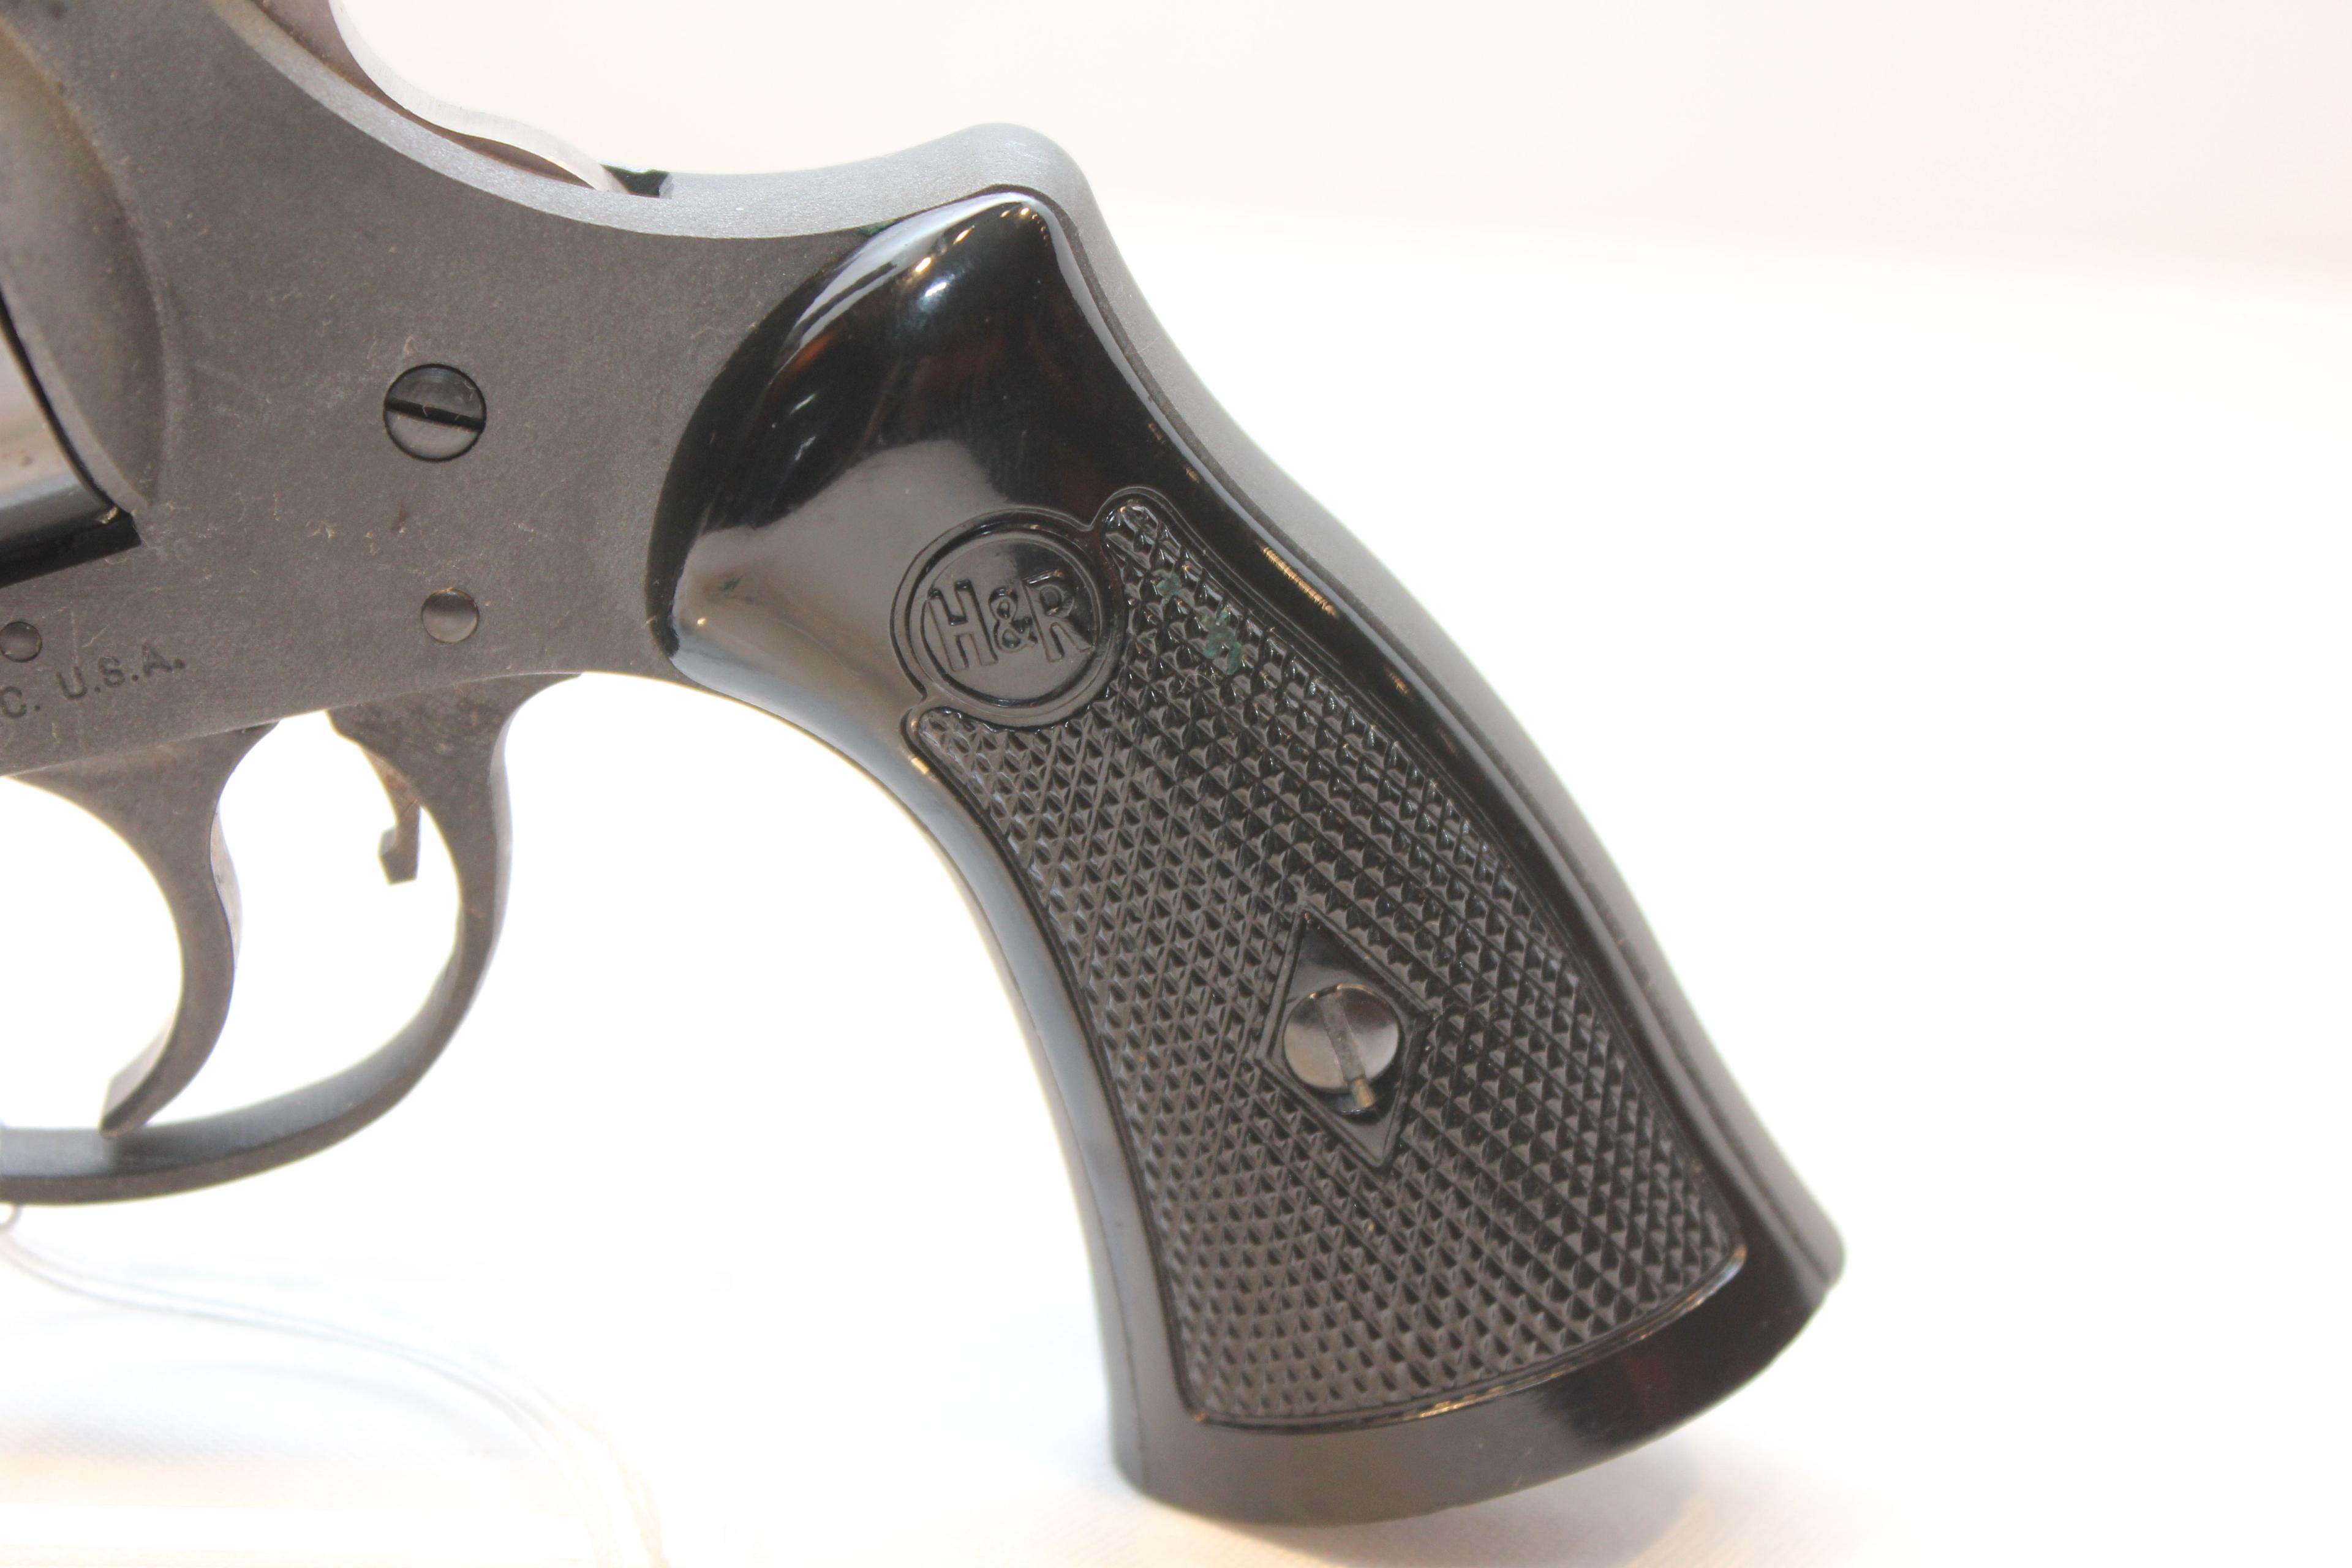 H&R Model 622 .22 LR Double Action 6-Shot Revolver w/4" BBL and Bakelite Grips; SN AE105386